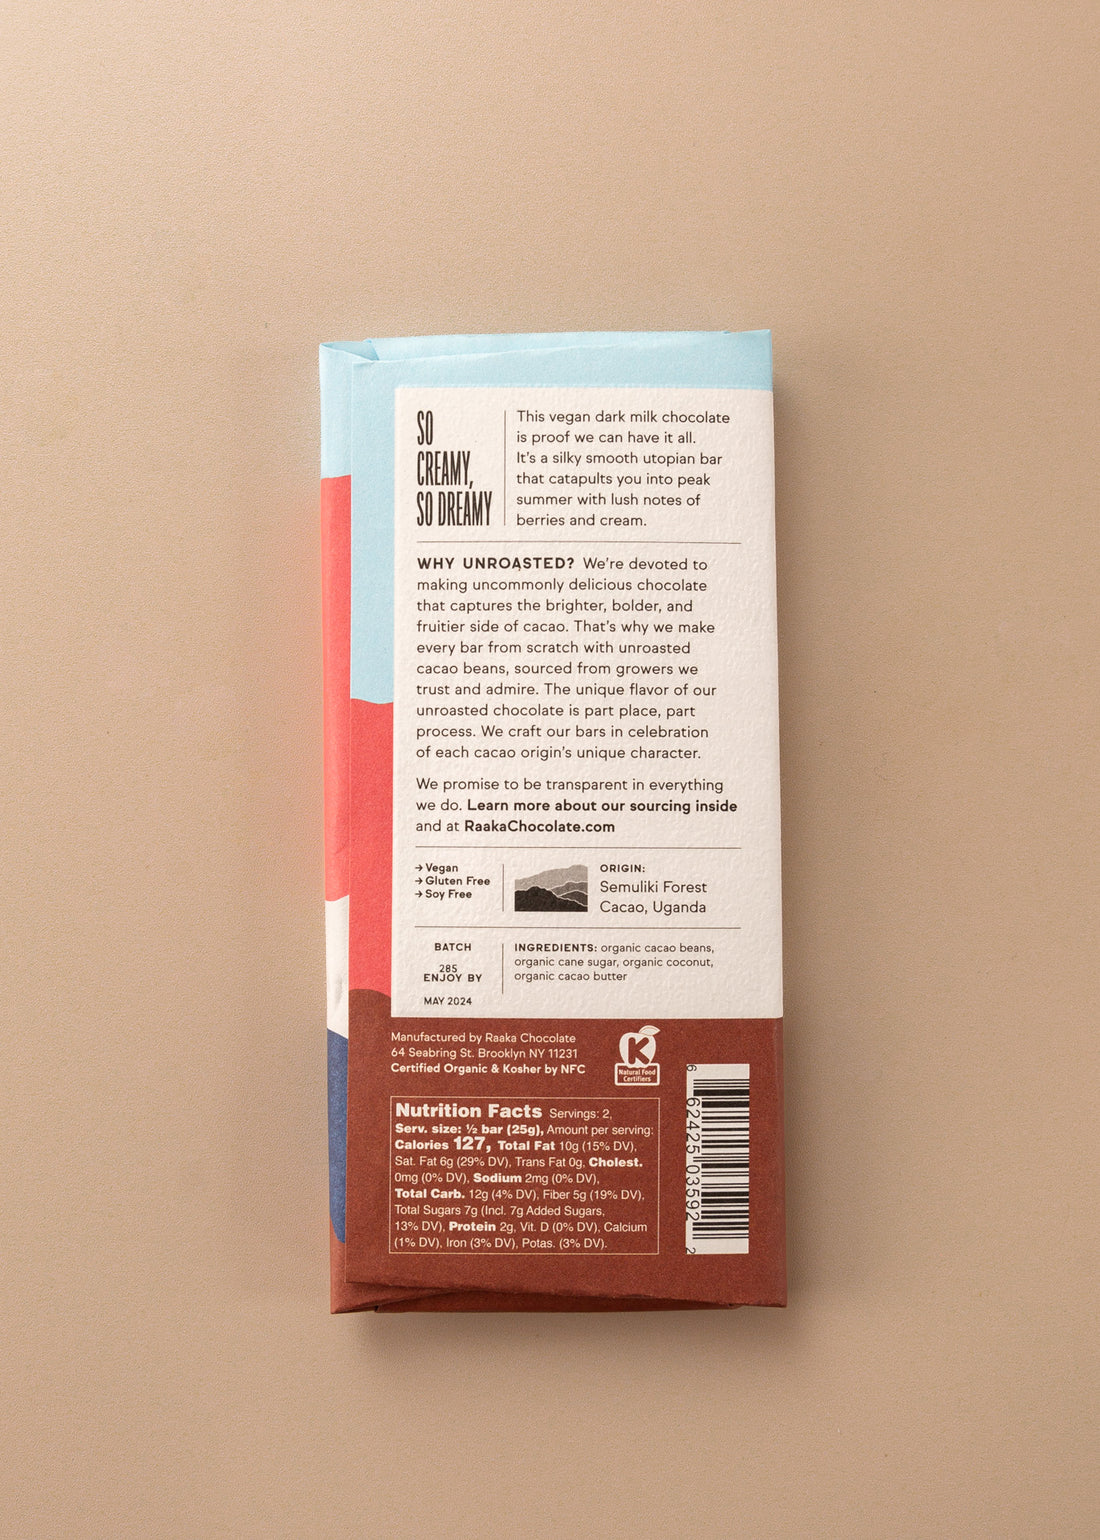 backside flatlay of the coconut milk chocolate bar by Raaka with details on the ingredients, why they use unroasted chocolate, and nutrition facts